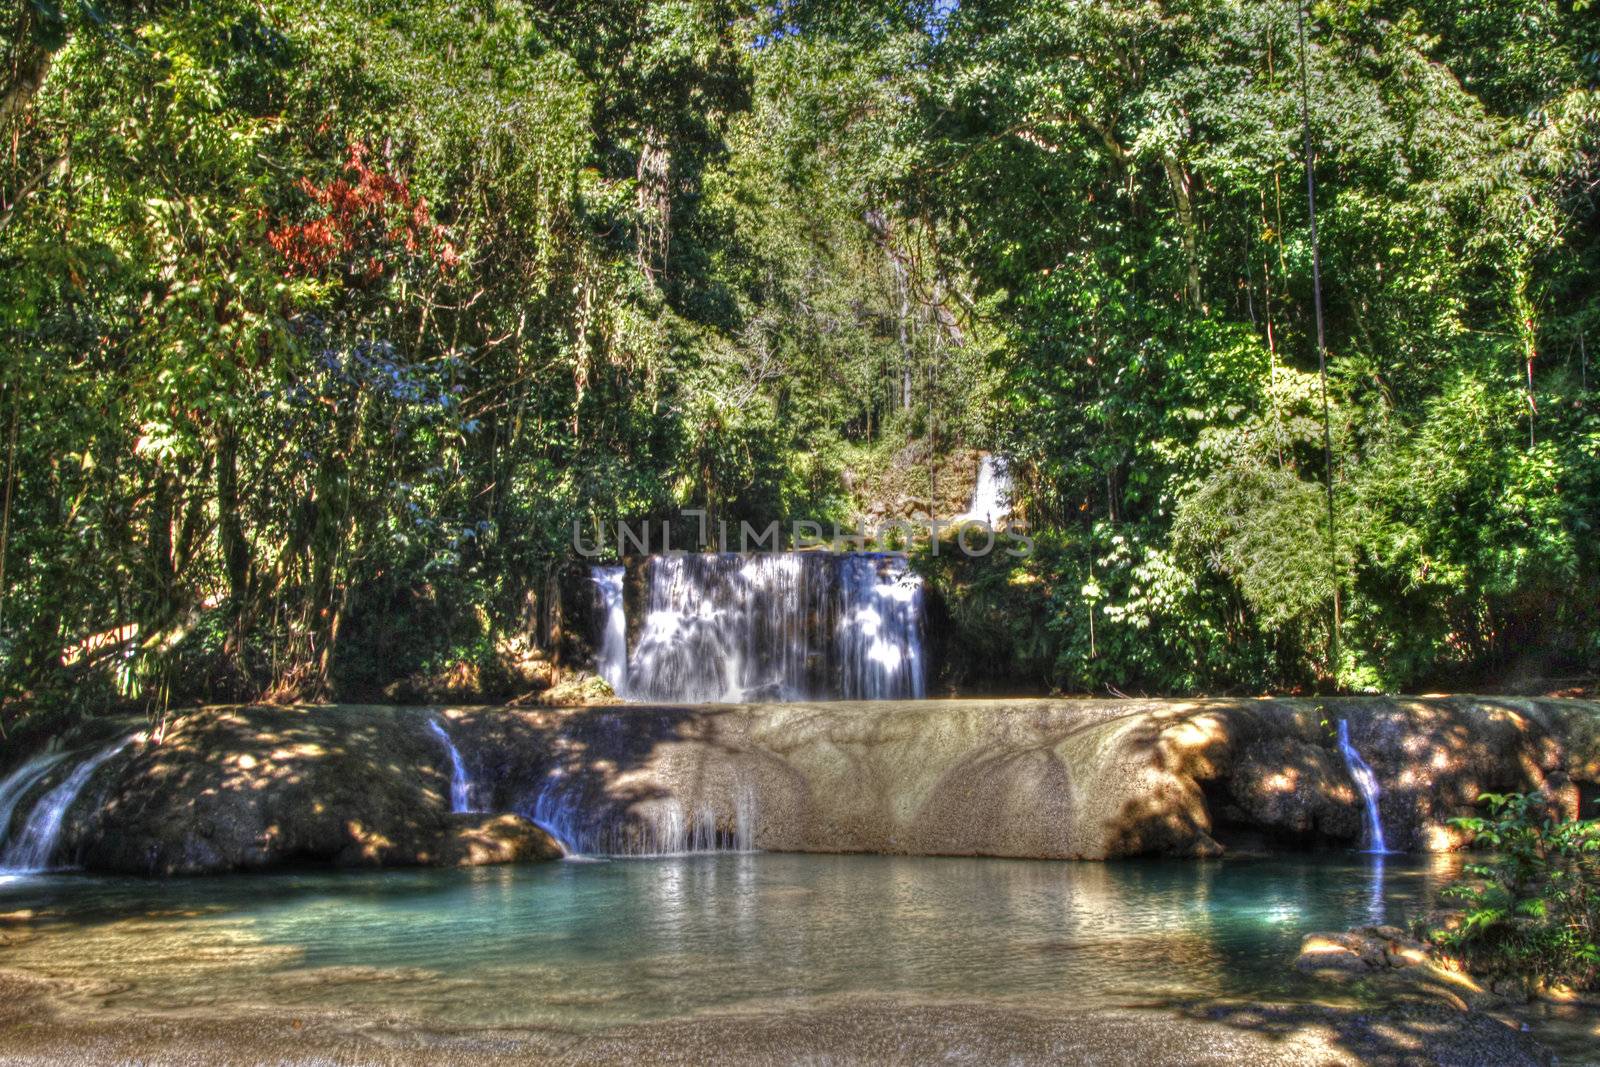 YJ falls in Jamaica with water pools